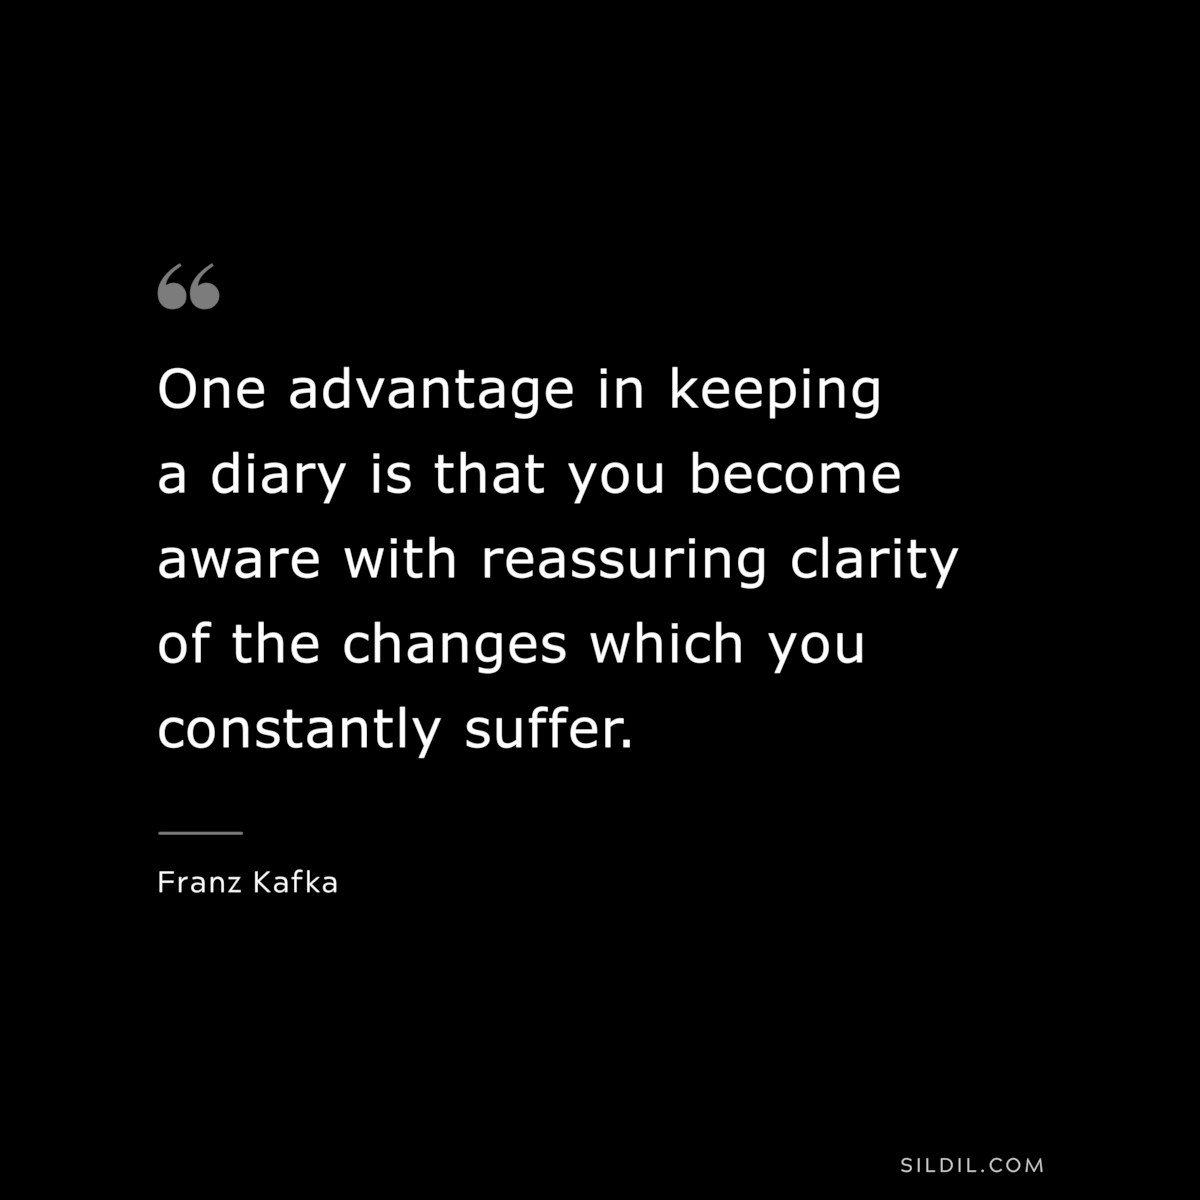 One advantage in keeping a diary is that you become aware with reassuring clarity of the changes which you constantly suffer. ― Franz Kafka